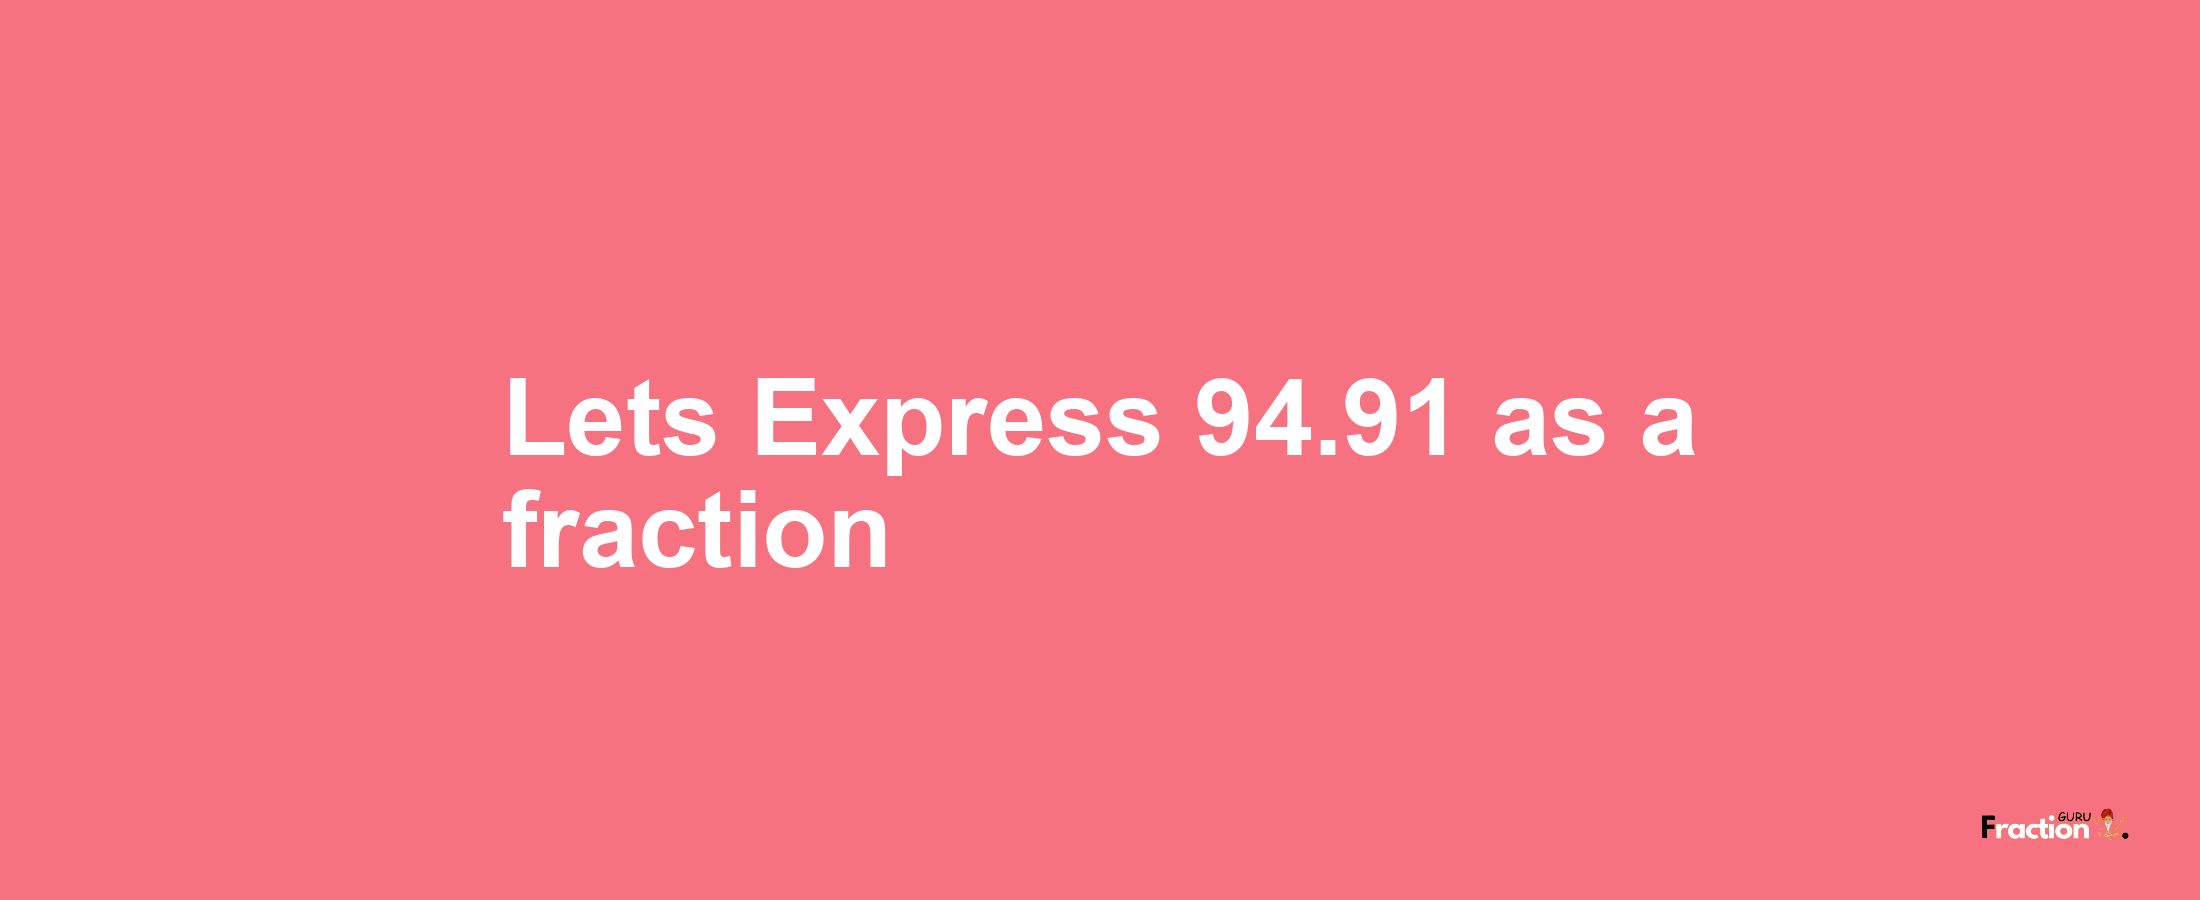 Lets Express 94.91 as afraction